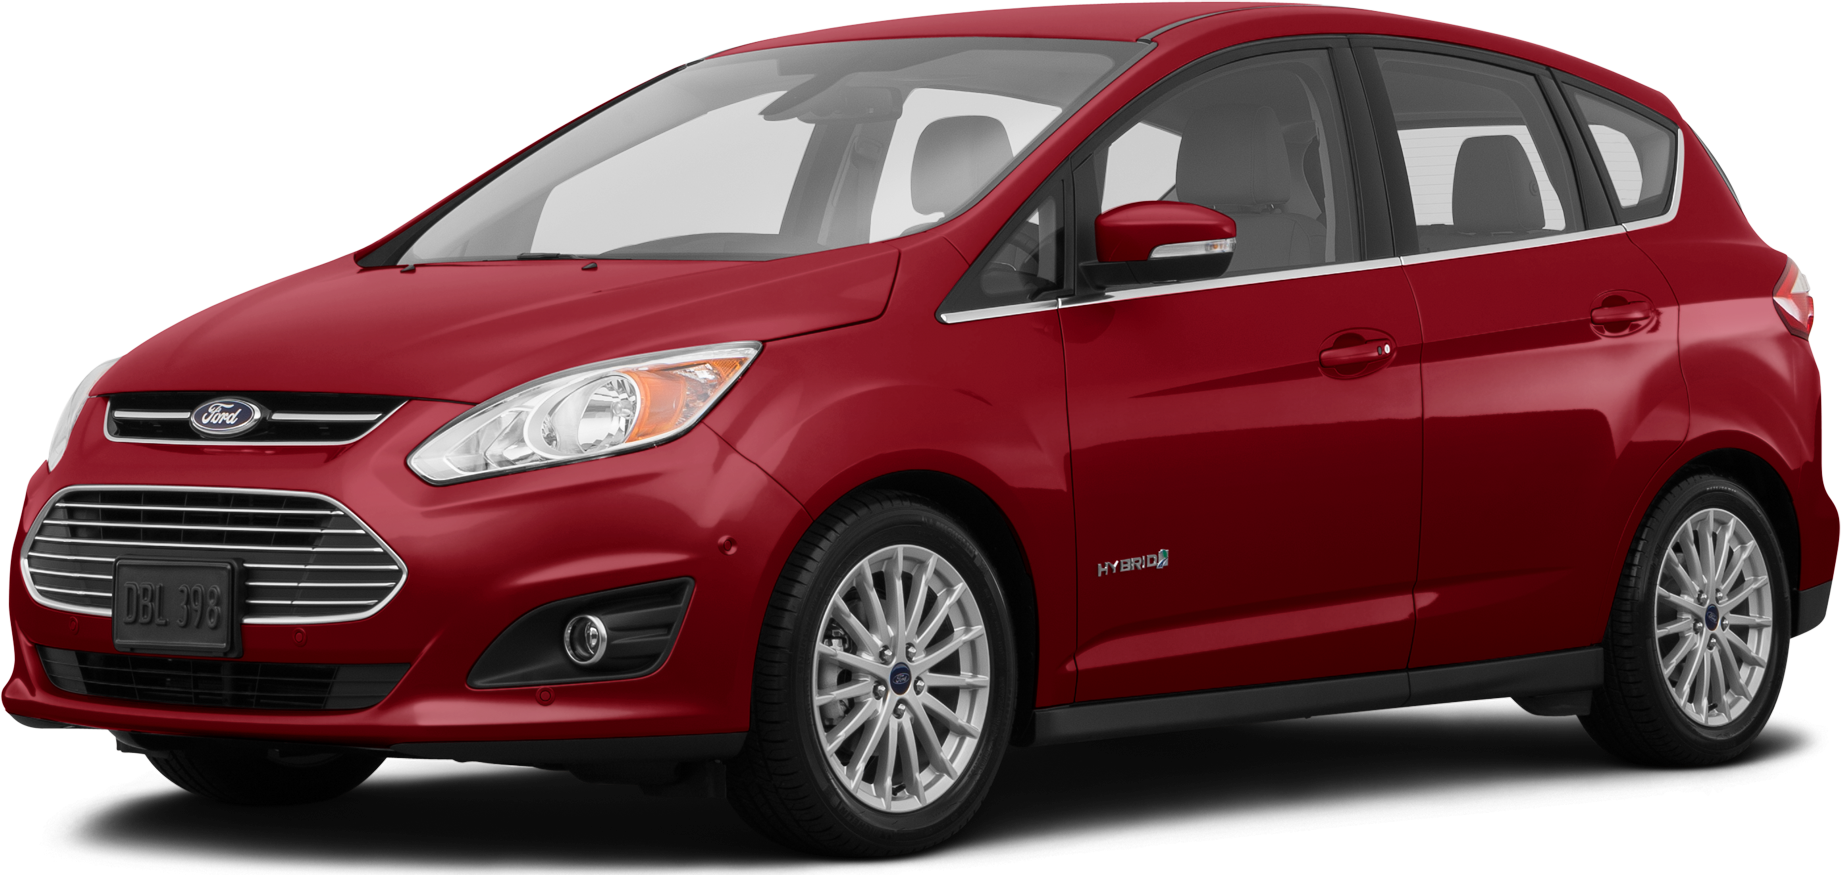 https://file.kelleybluebookimages.com/kbb/base/evox/CP/9588/2014-Ford-C-MAX%20Hybrid-front_9588_032_1841x875_RR_cropped.png